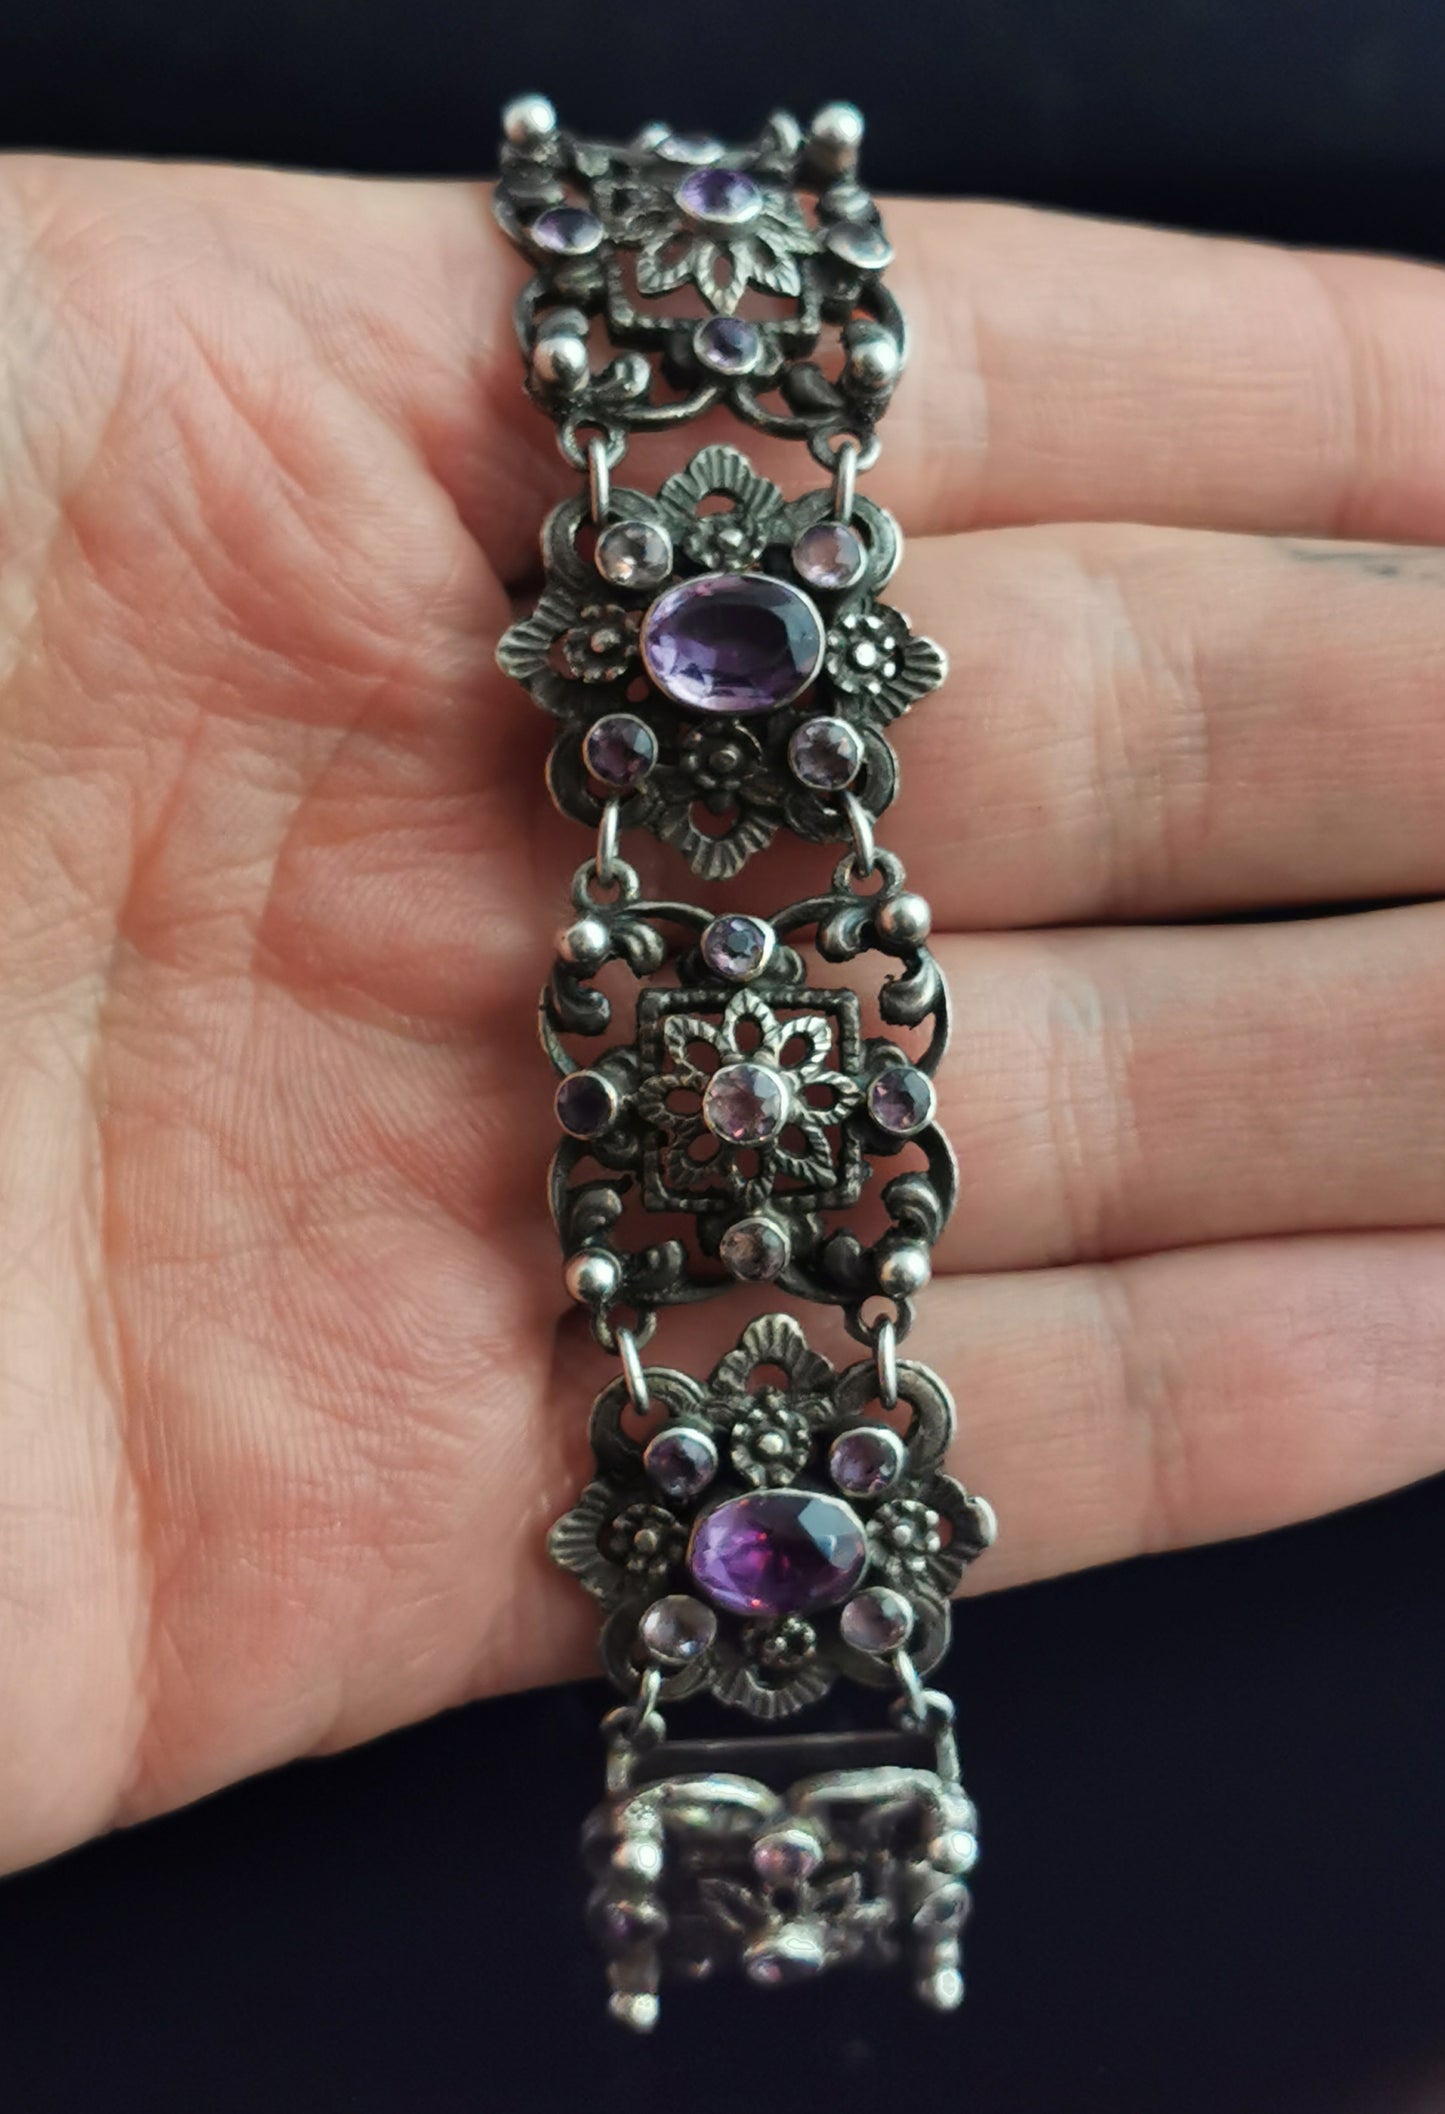 Antique Arts and Crafts silver and Amethyst bracelet